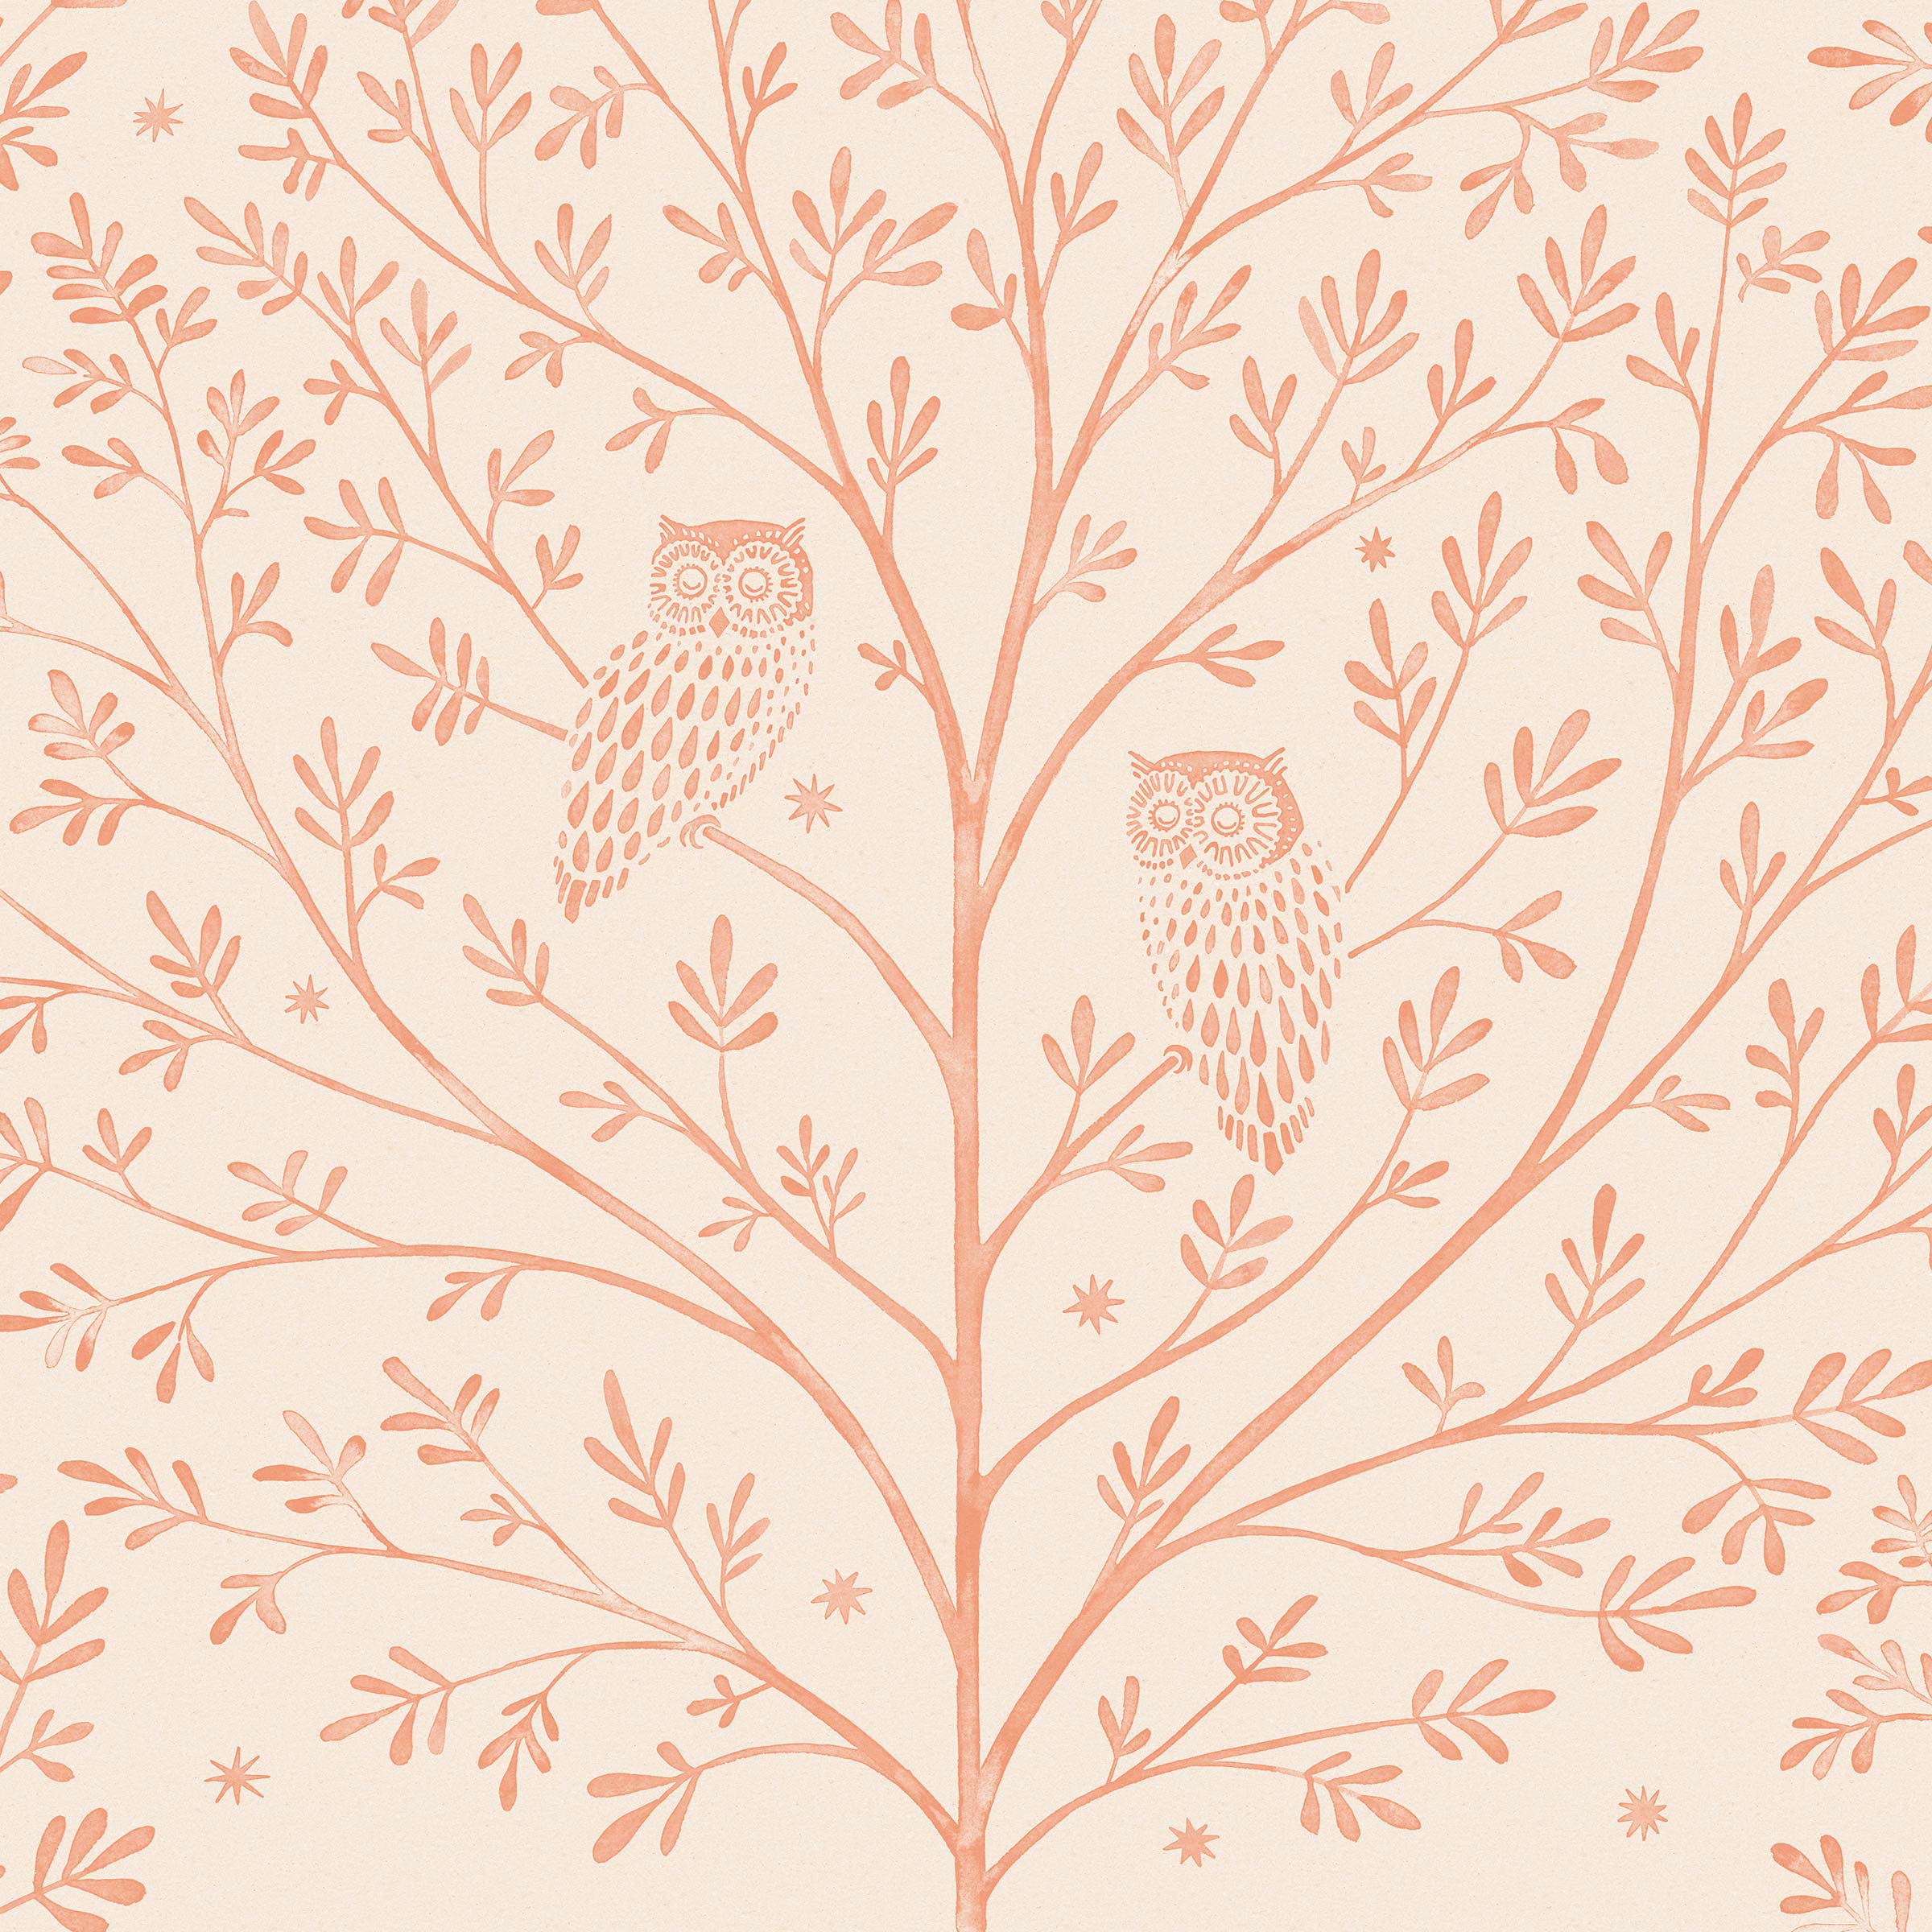 Detail of wallpaper in a repeating owl and tree print in coral on a cream field.